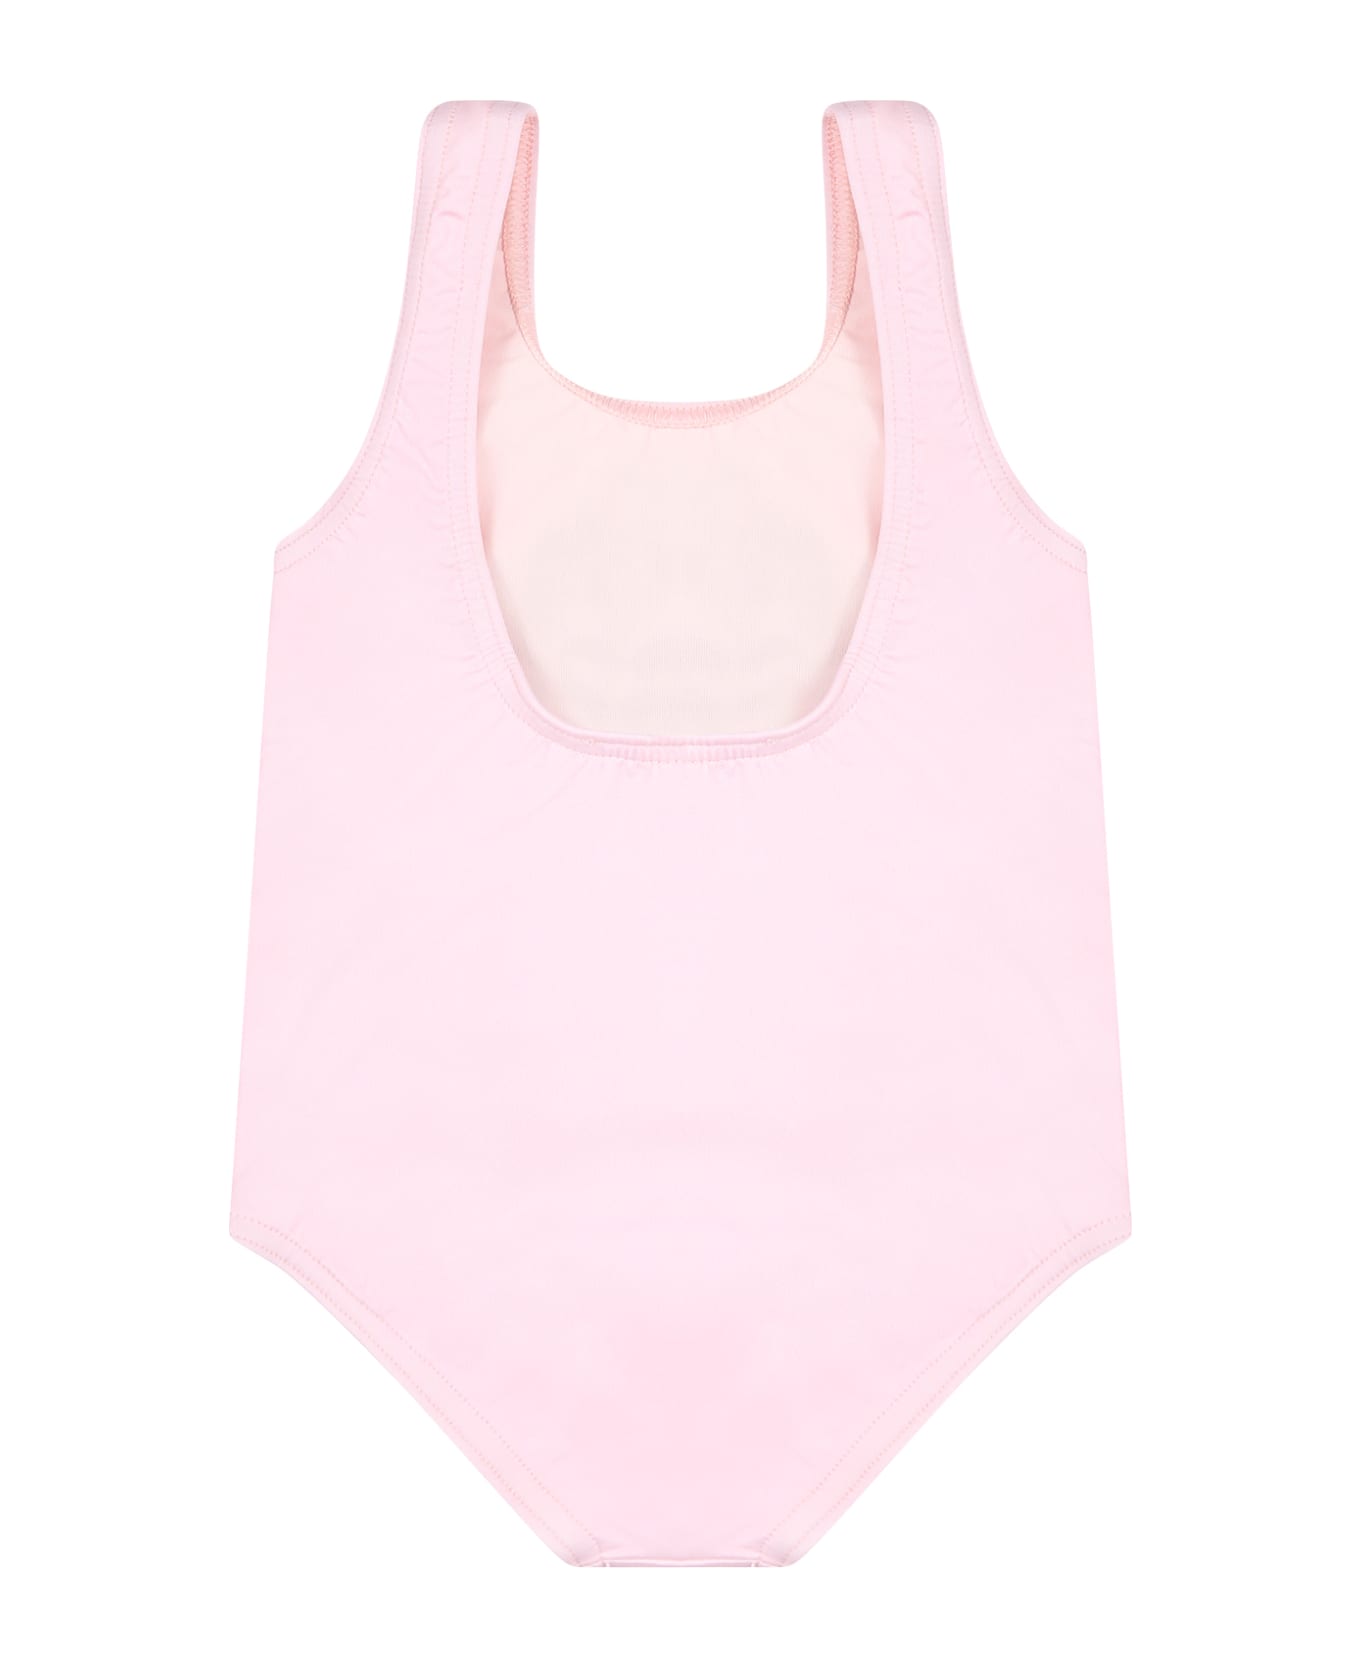 Moschino Pink Swimsuit For Baby Girl With Teddy Bears - Pink 水着